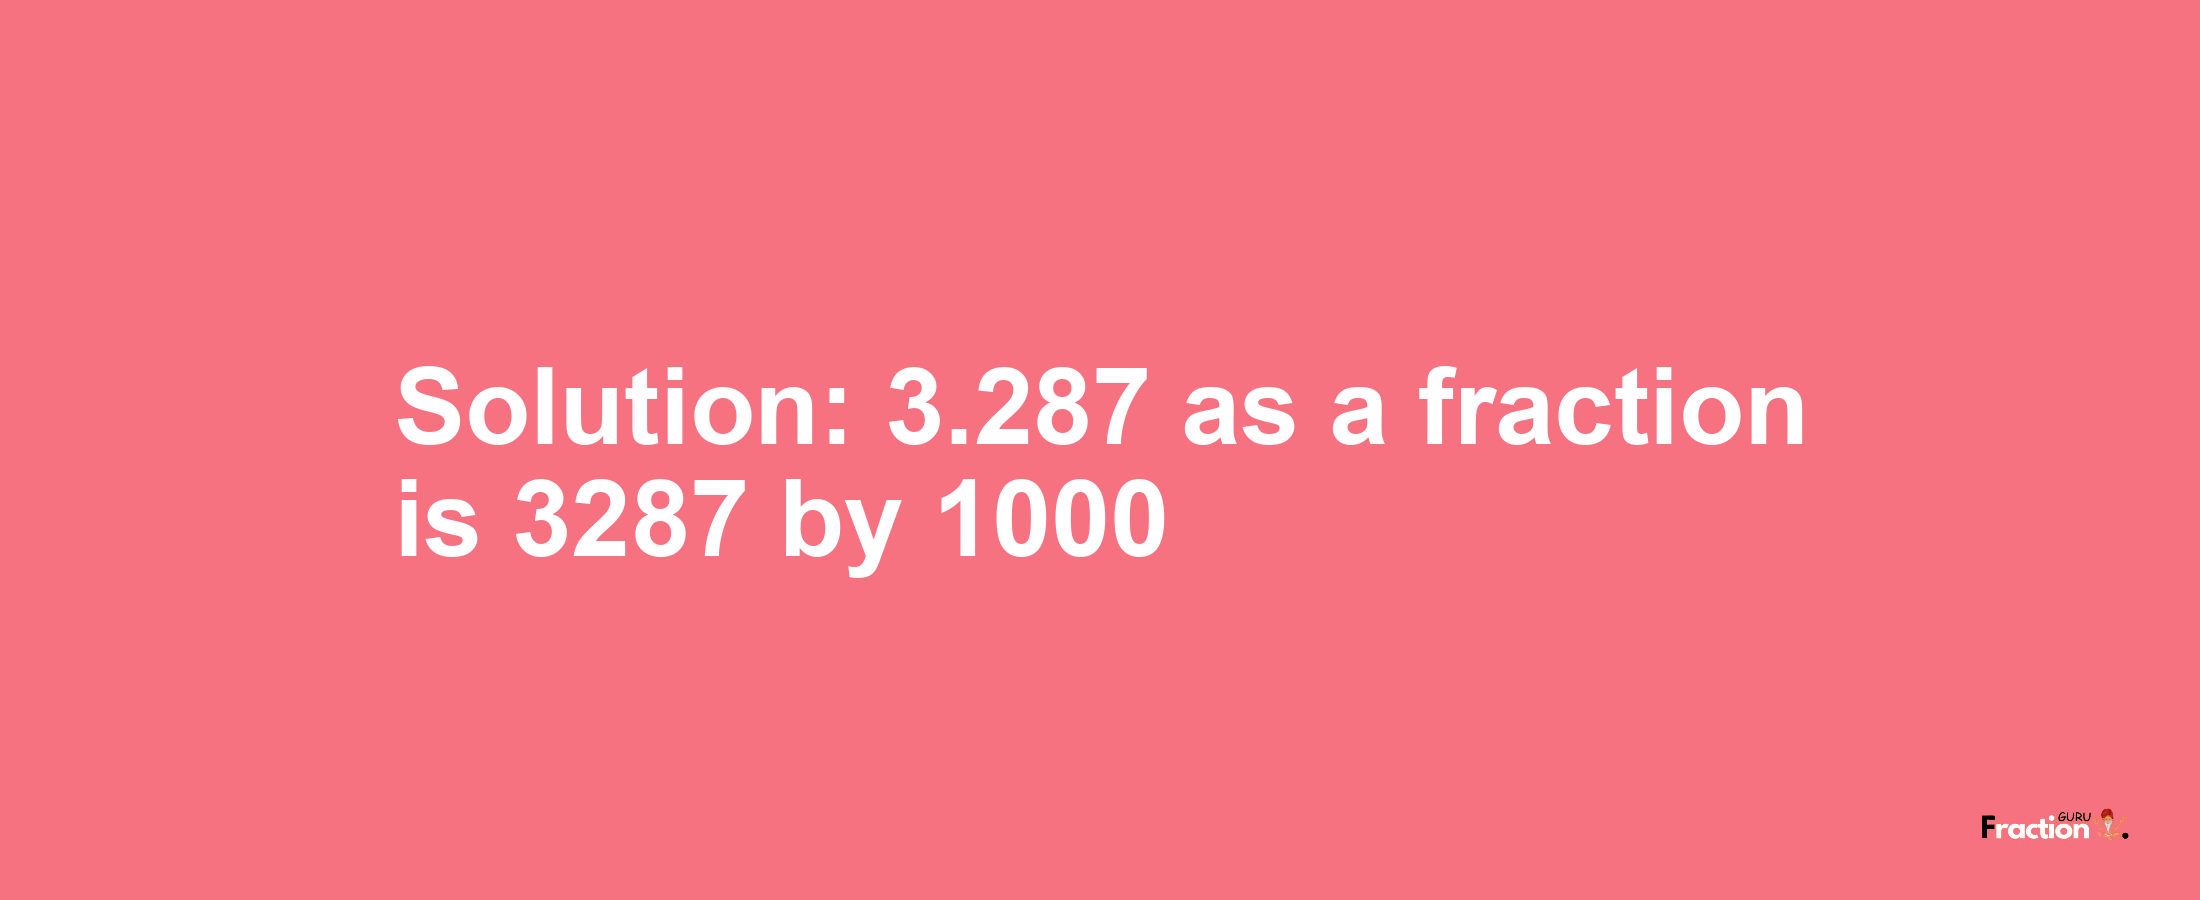 Solution:3.287 as a fraction is 3287/1000